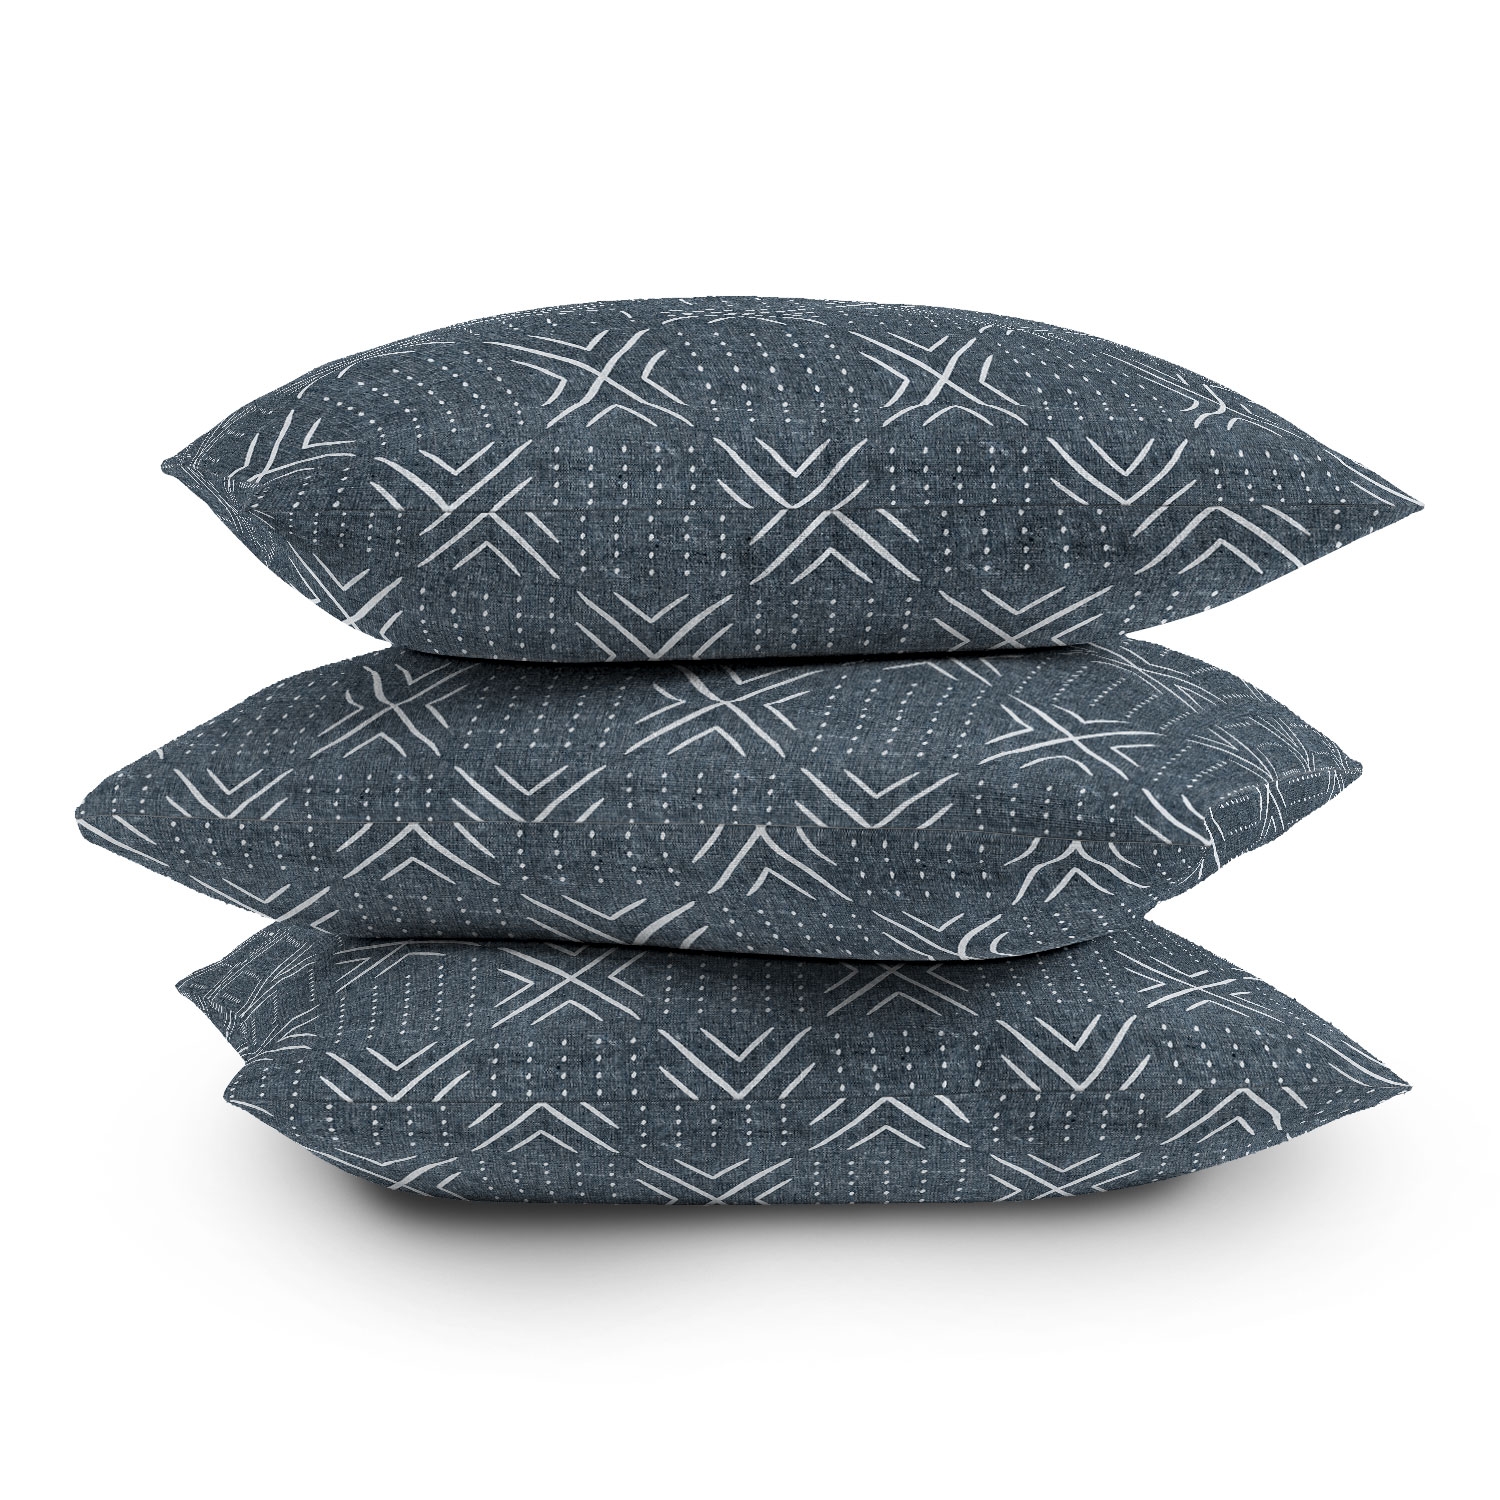 Mud Cloth Tile Navy by Little Arrow Design Co - Outdoor Throw Pillow 20" x 20" - Image 3